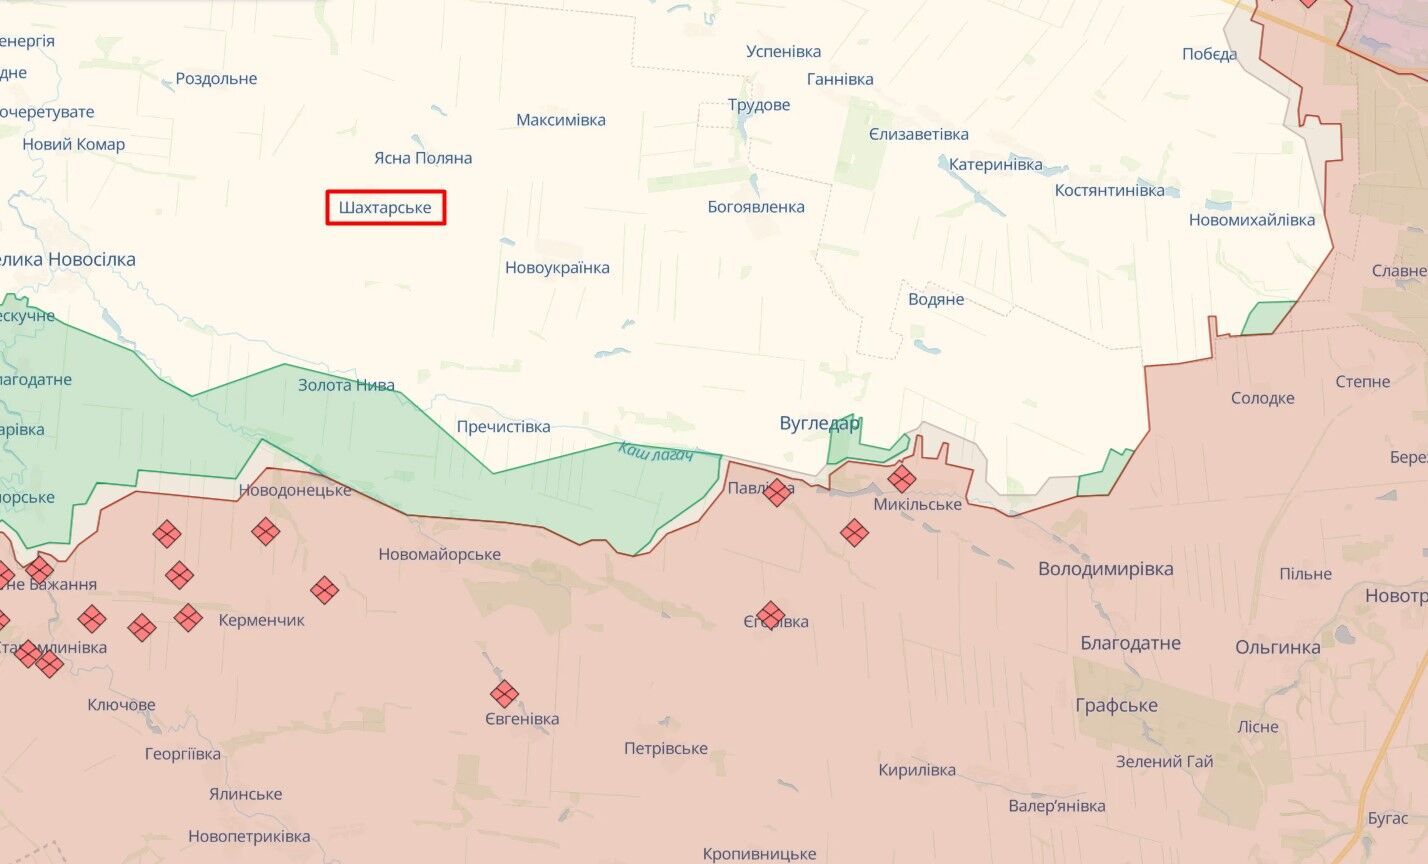 Attacks near Bakhmut and Maryinka repelled, enemy unsuccessfully tried to regain positions near Avdiivka - General Staff